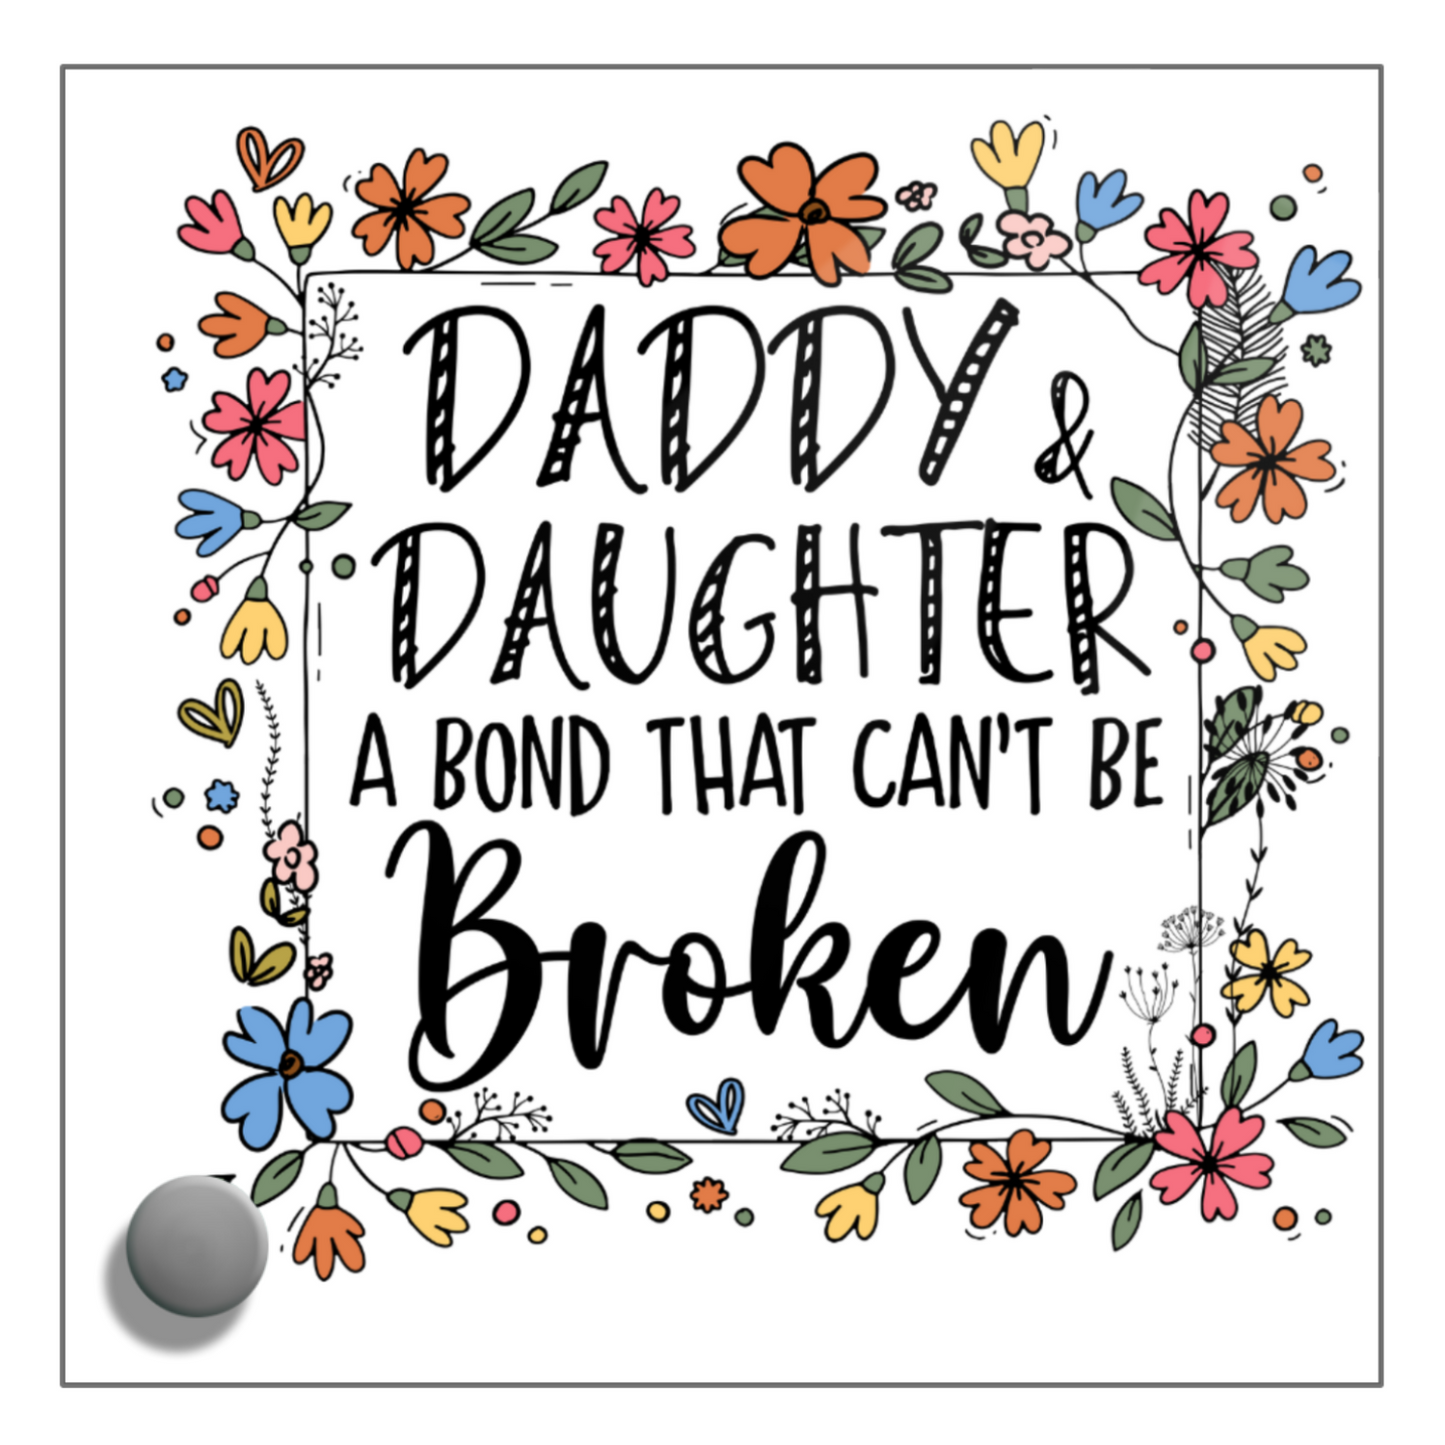 Daddy & Daughter: A Bond That Can't Be Broken" Watch and Lumenglass Message Set